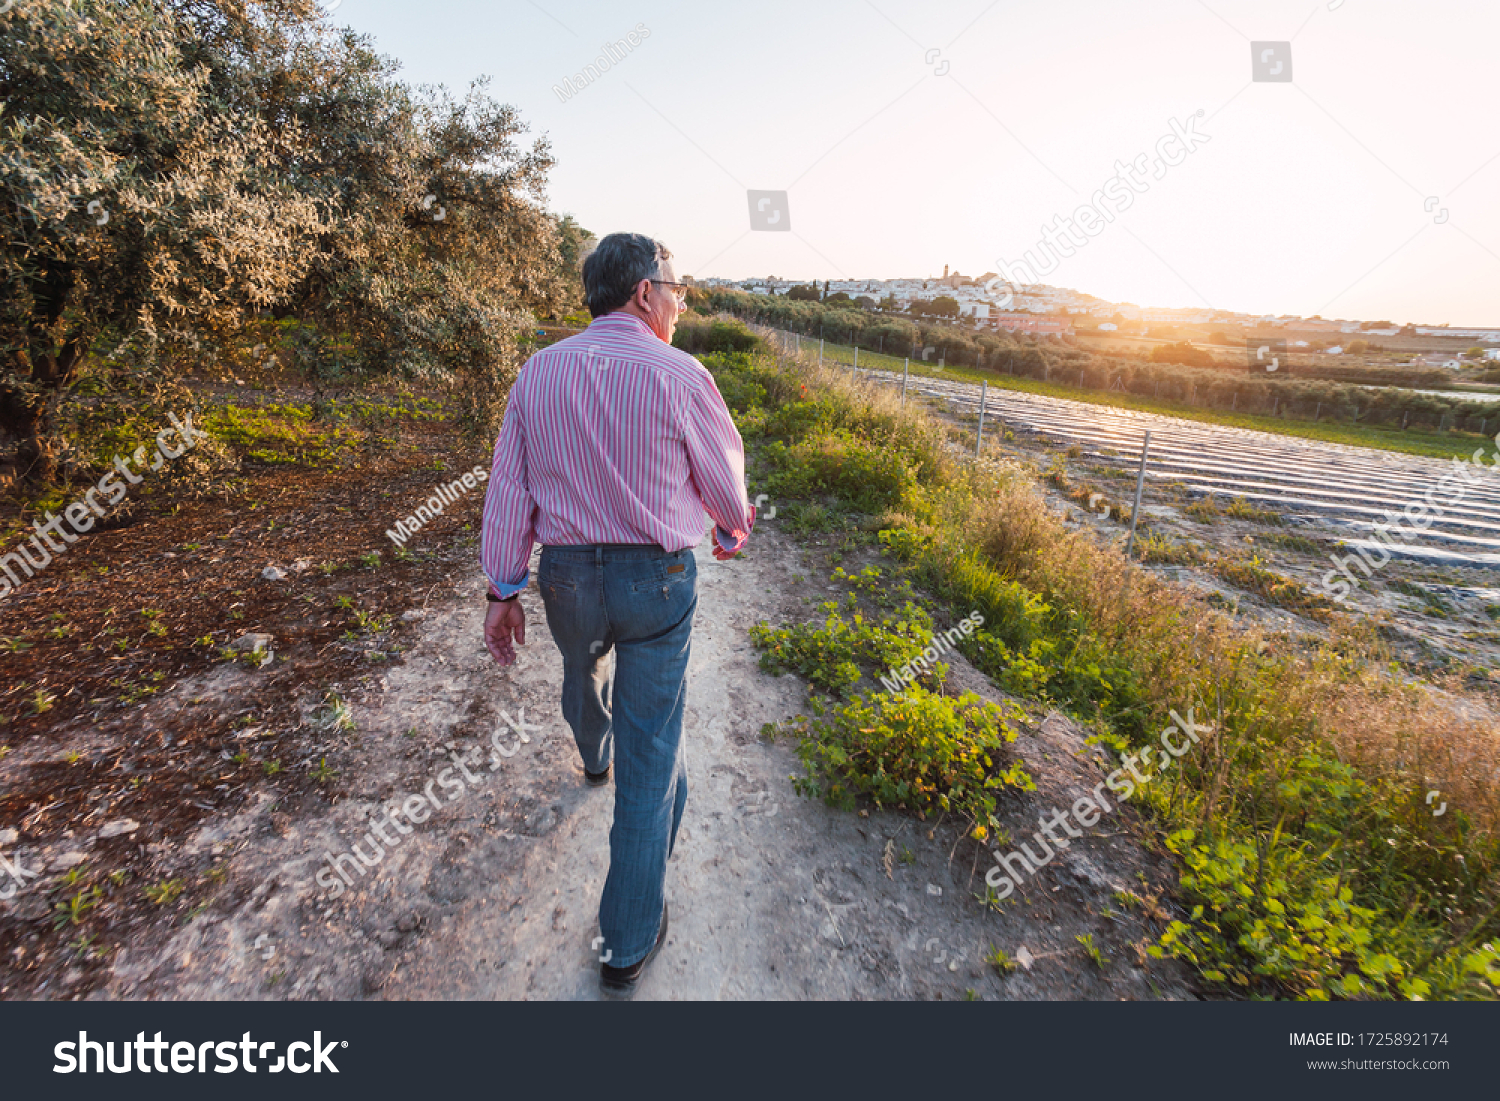 Older man walks alone on the street after being confined by coronavirus. Blurred edges. #1725892174